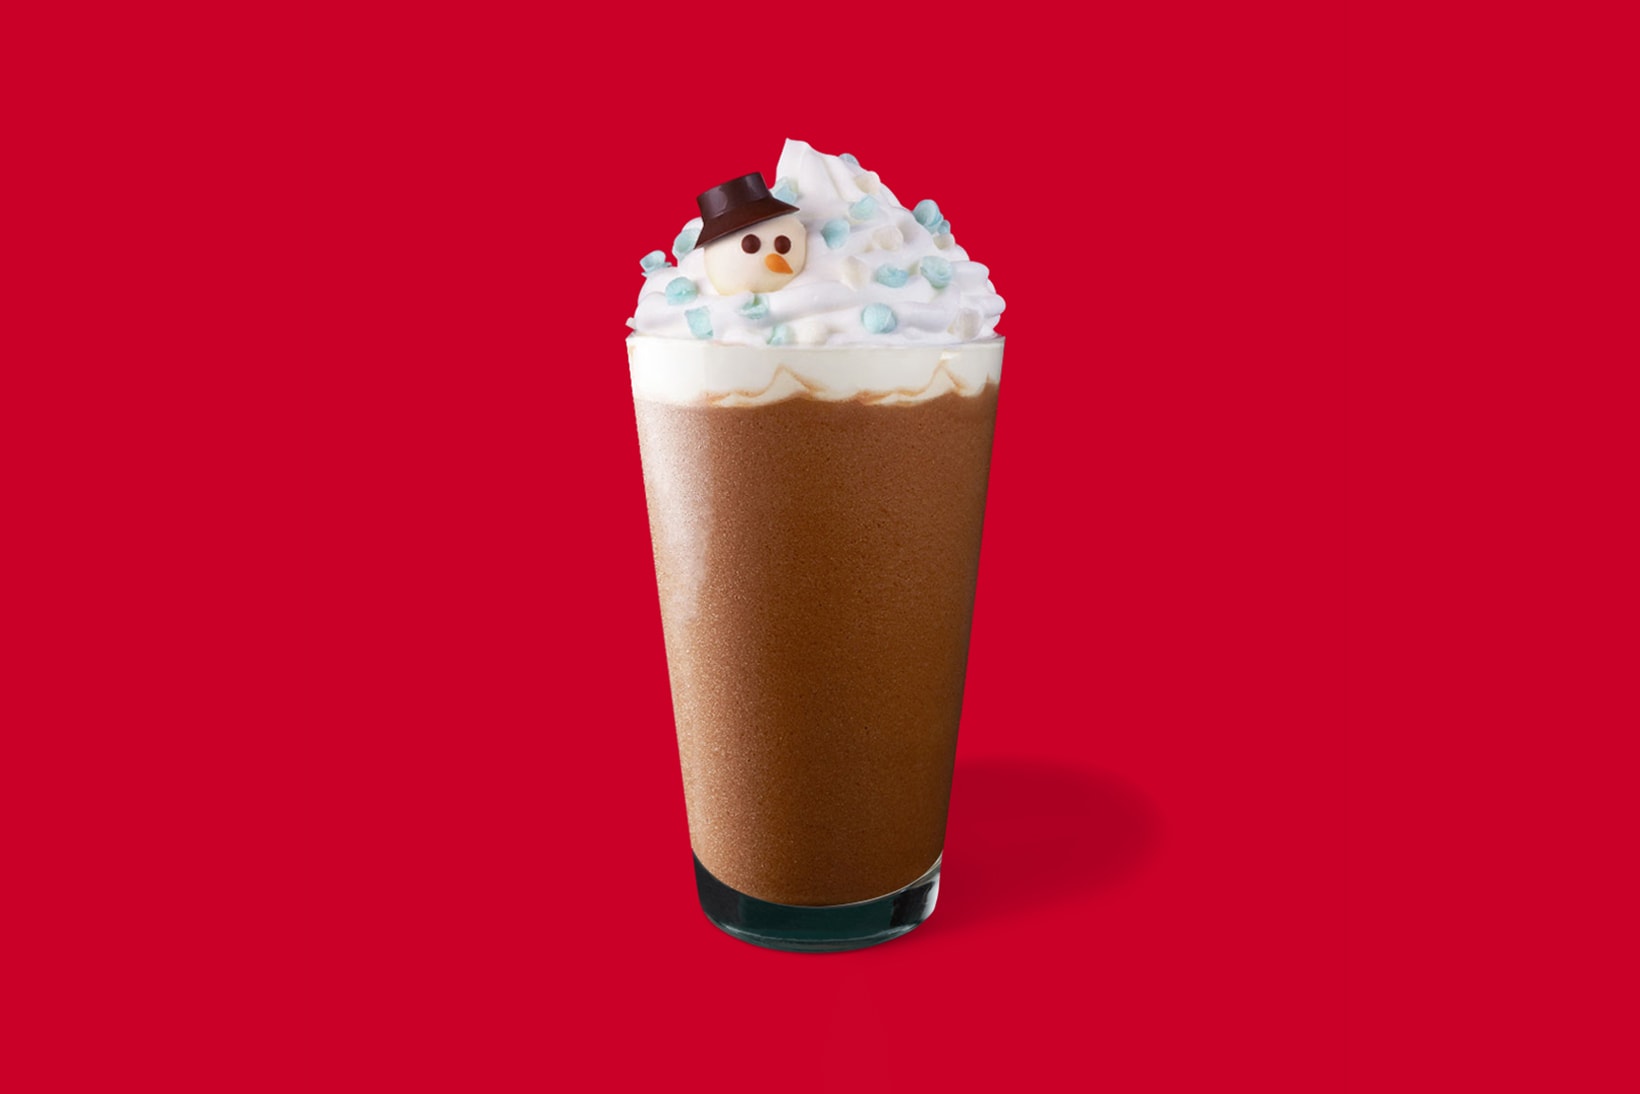 Starbucks Japan serves up 'Merry Cream' in its new Christmas